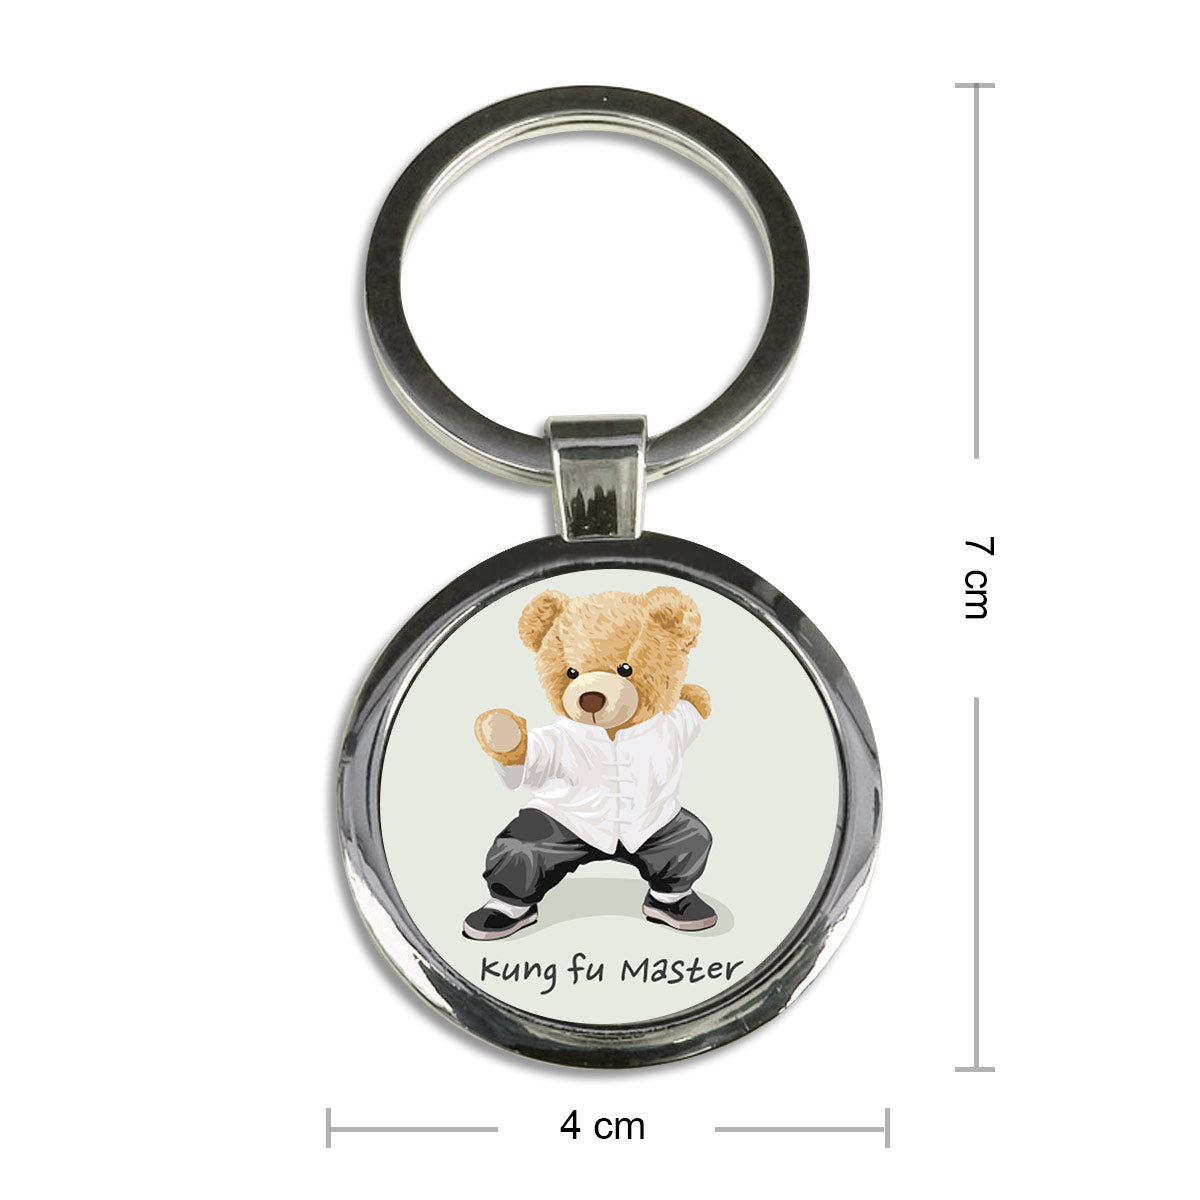 Teddy Day Special Kung Fu Master Round Metal Keychain